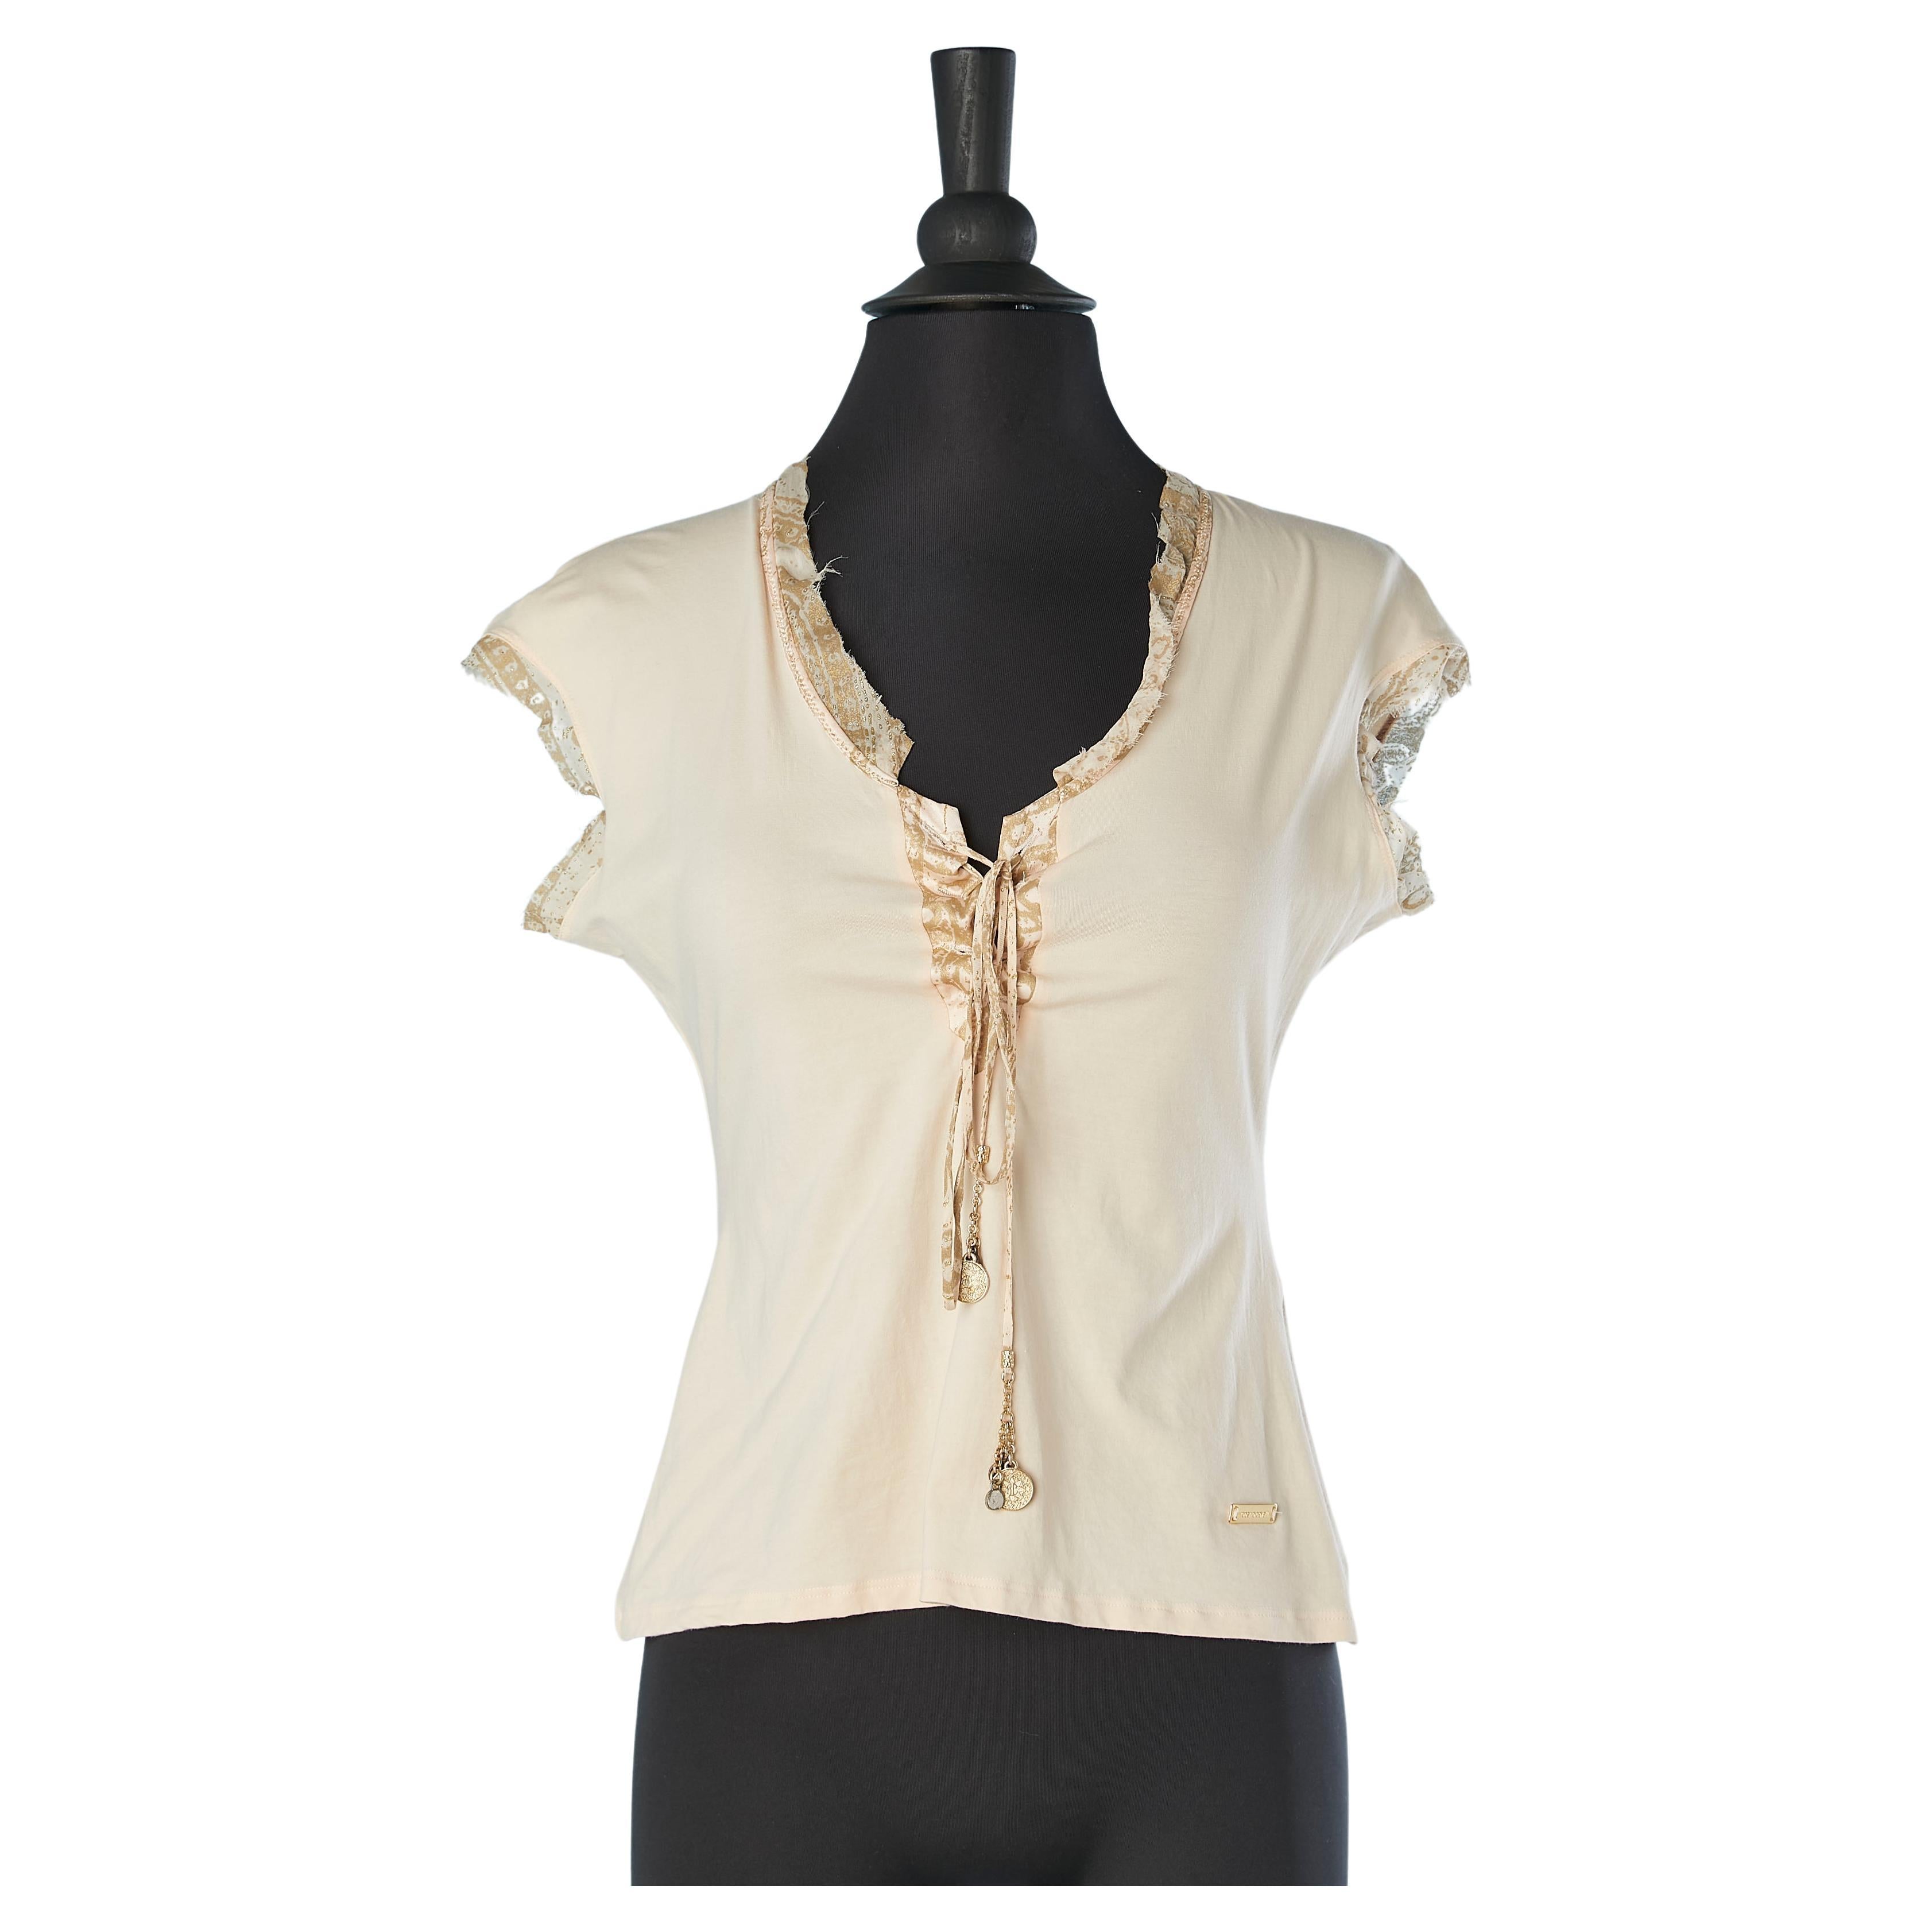 Pink sleeveless tee-shirt with silk laces in the front ROBERTO CAVALLI  For Sale